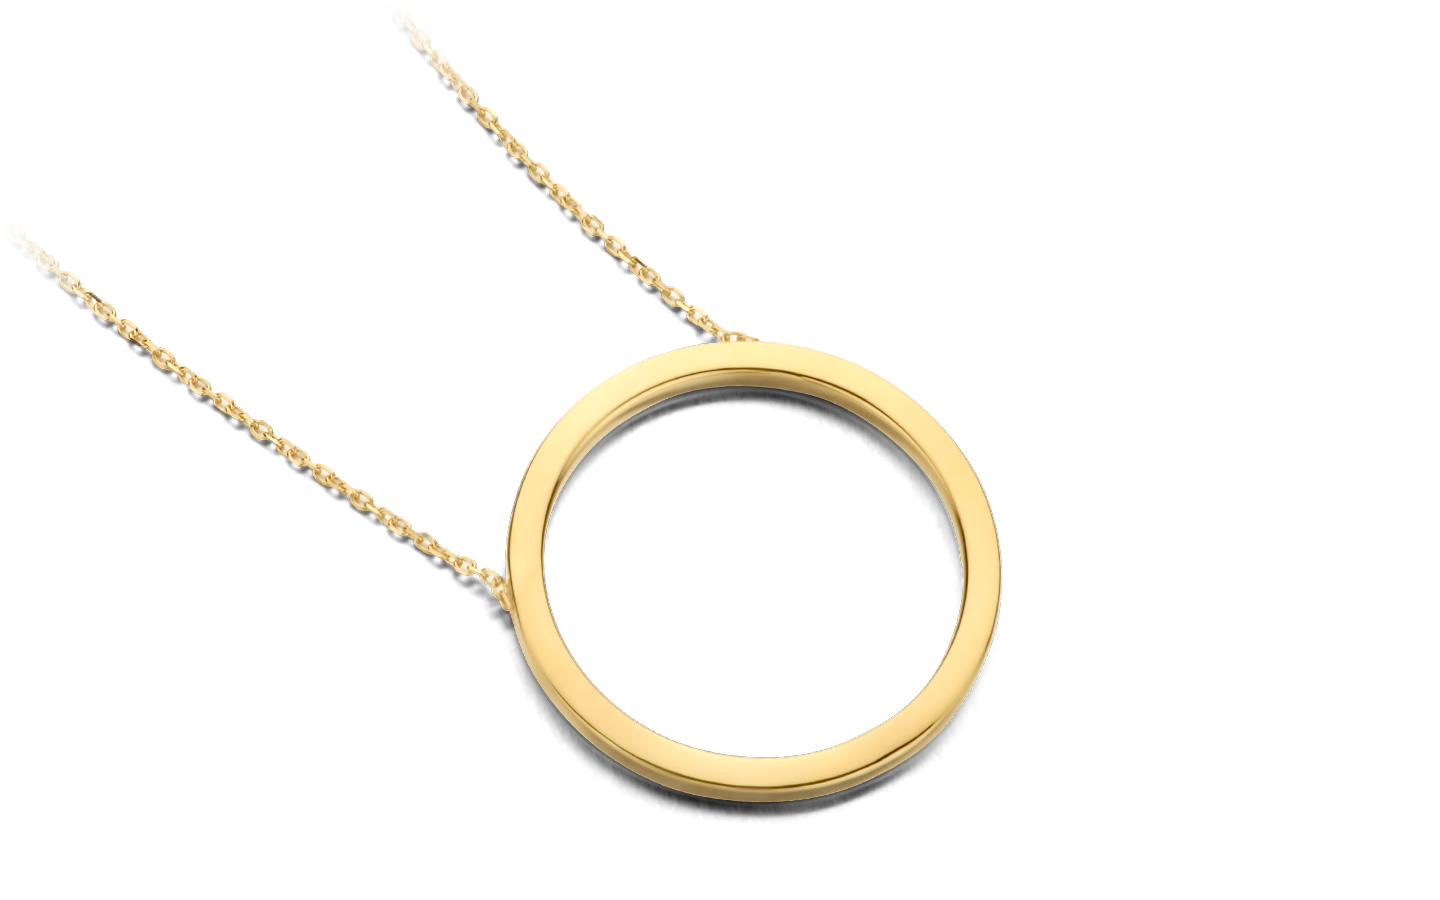 Collection-Tollet-Collier-Circulaire a prix tendres